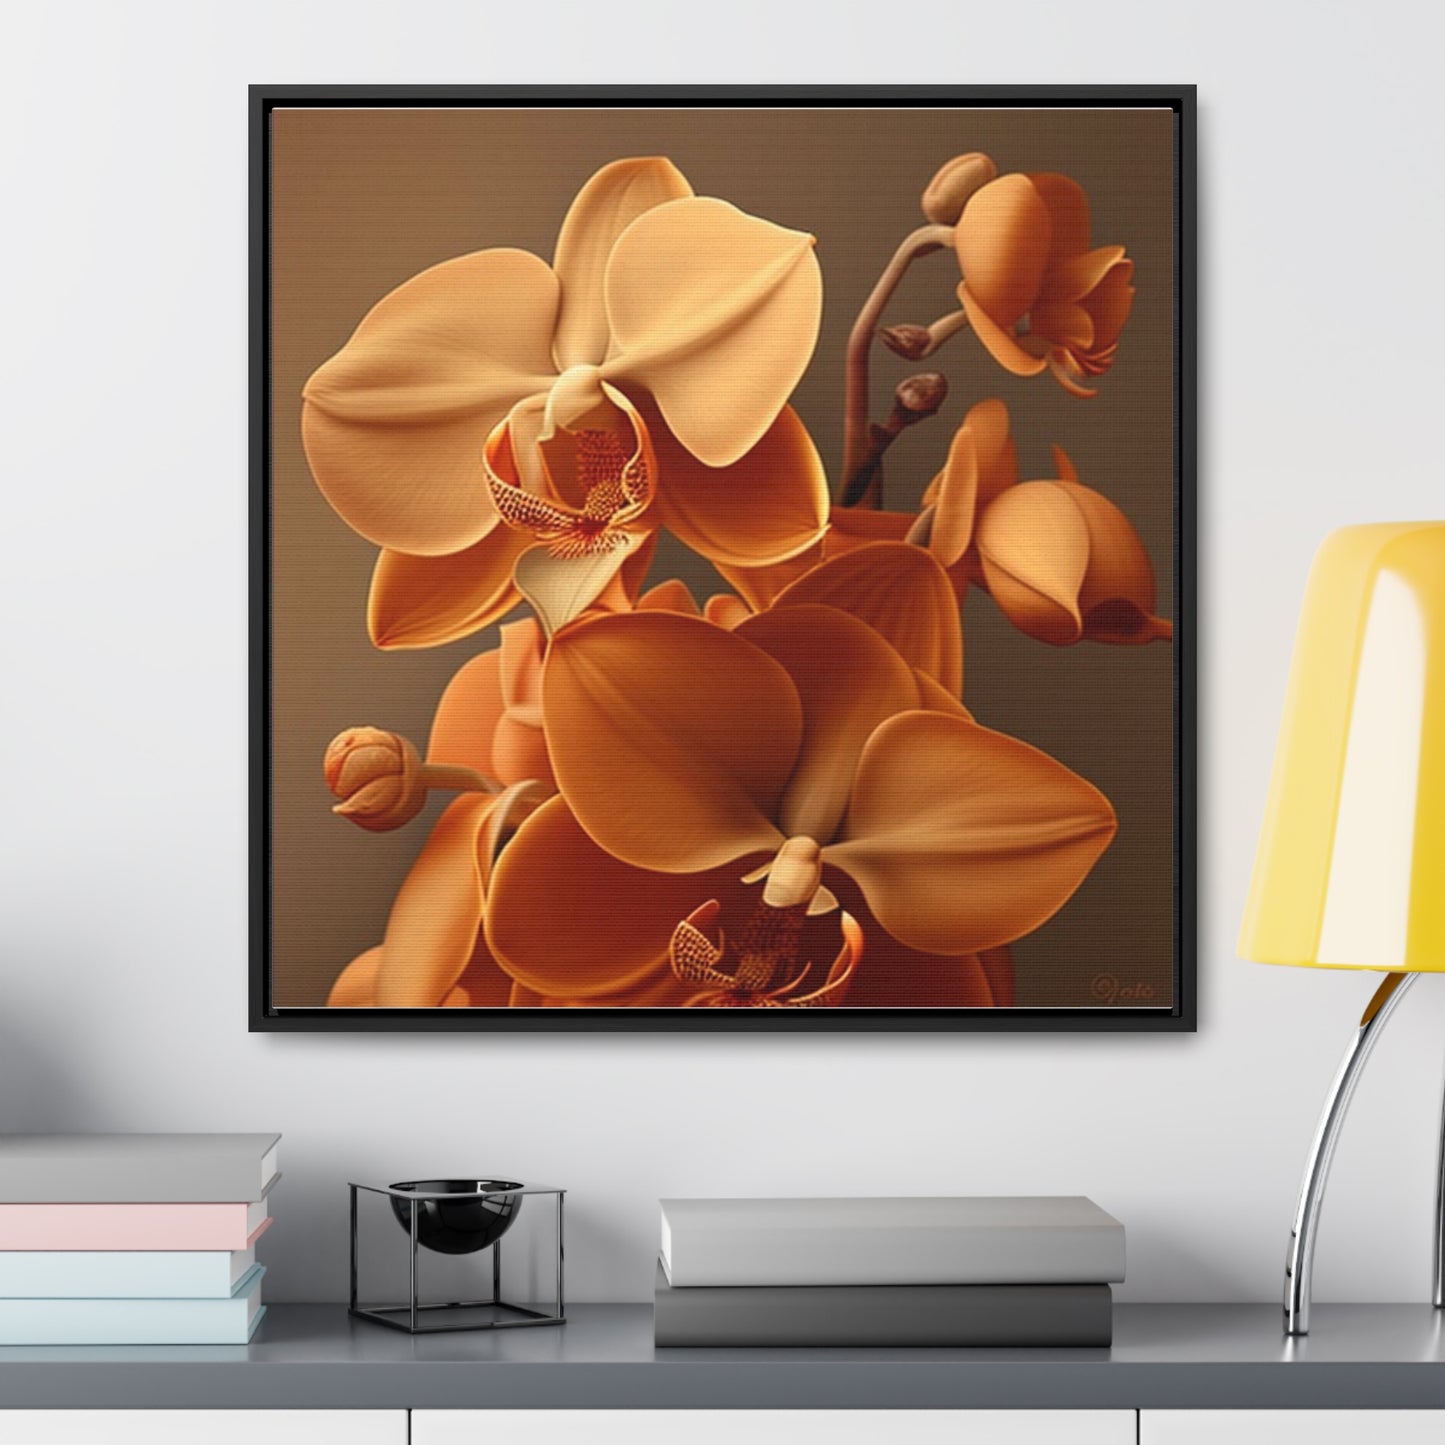 Gallery Canvas Wraps, Square Frame orchid pedals 4